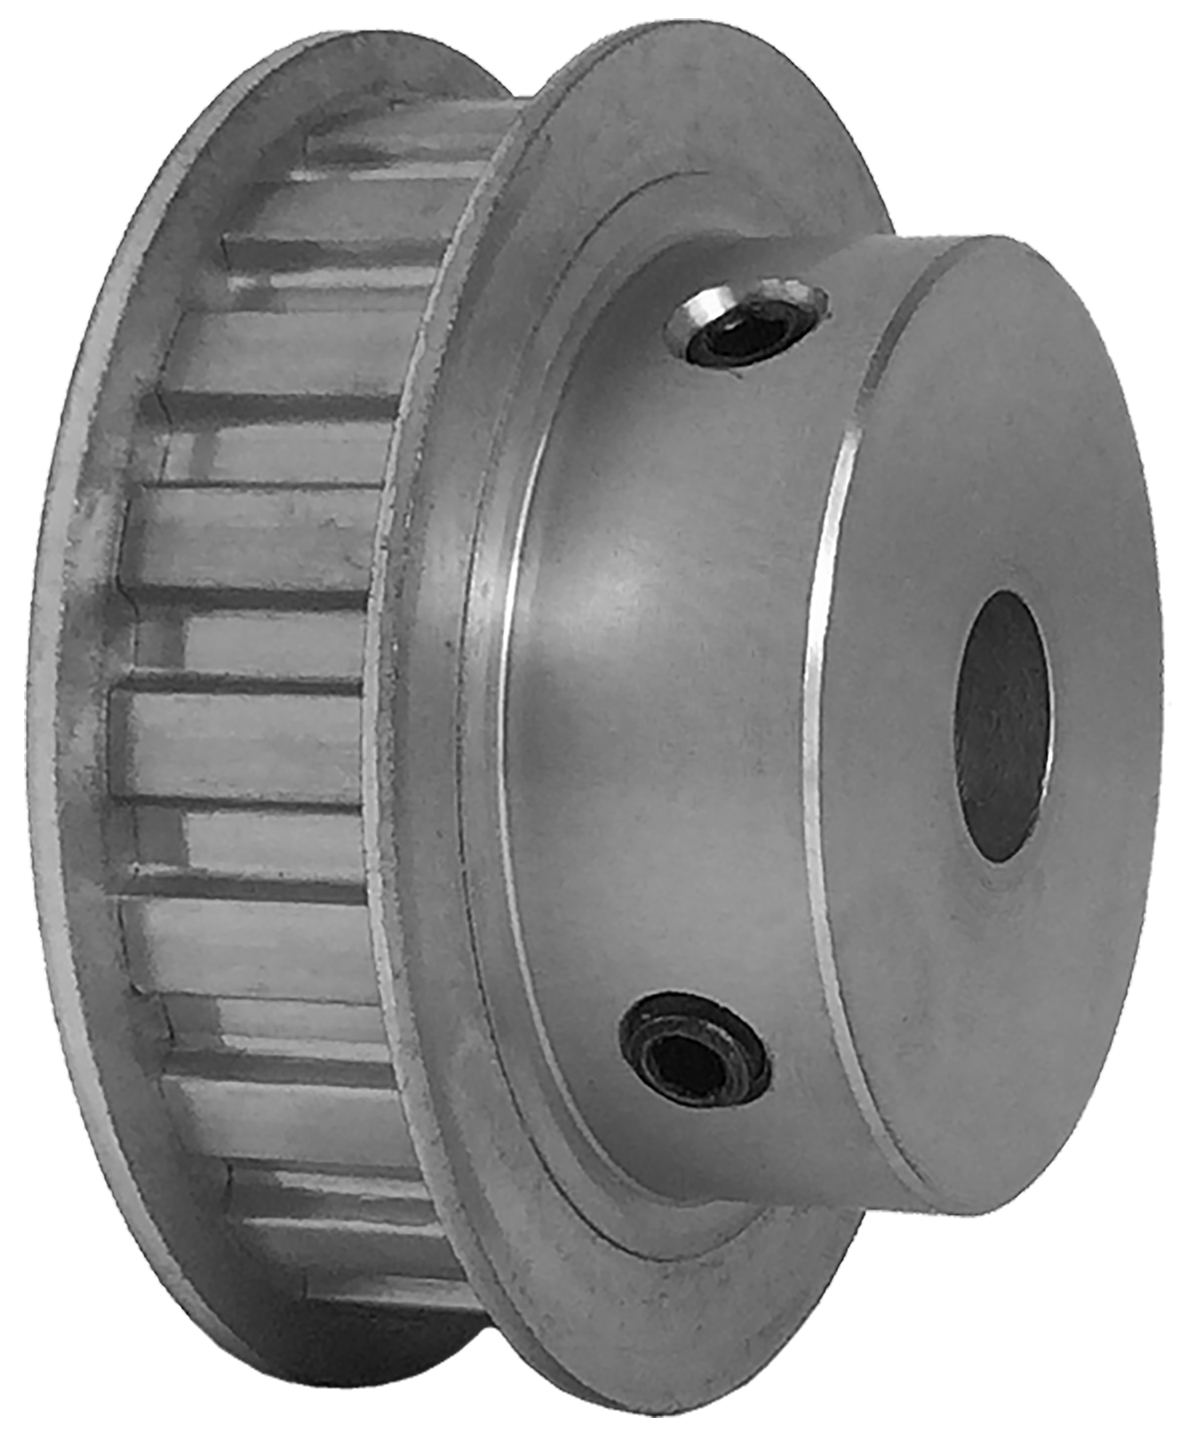 20L050-6FA6 - Aluminum Imperial Pitch Pulleys